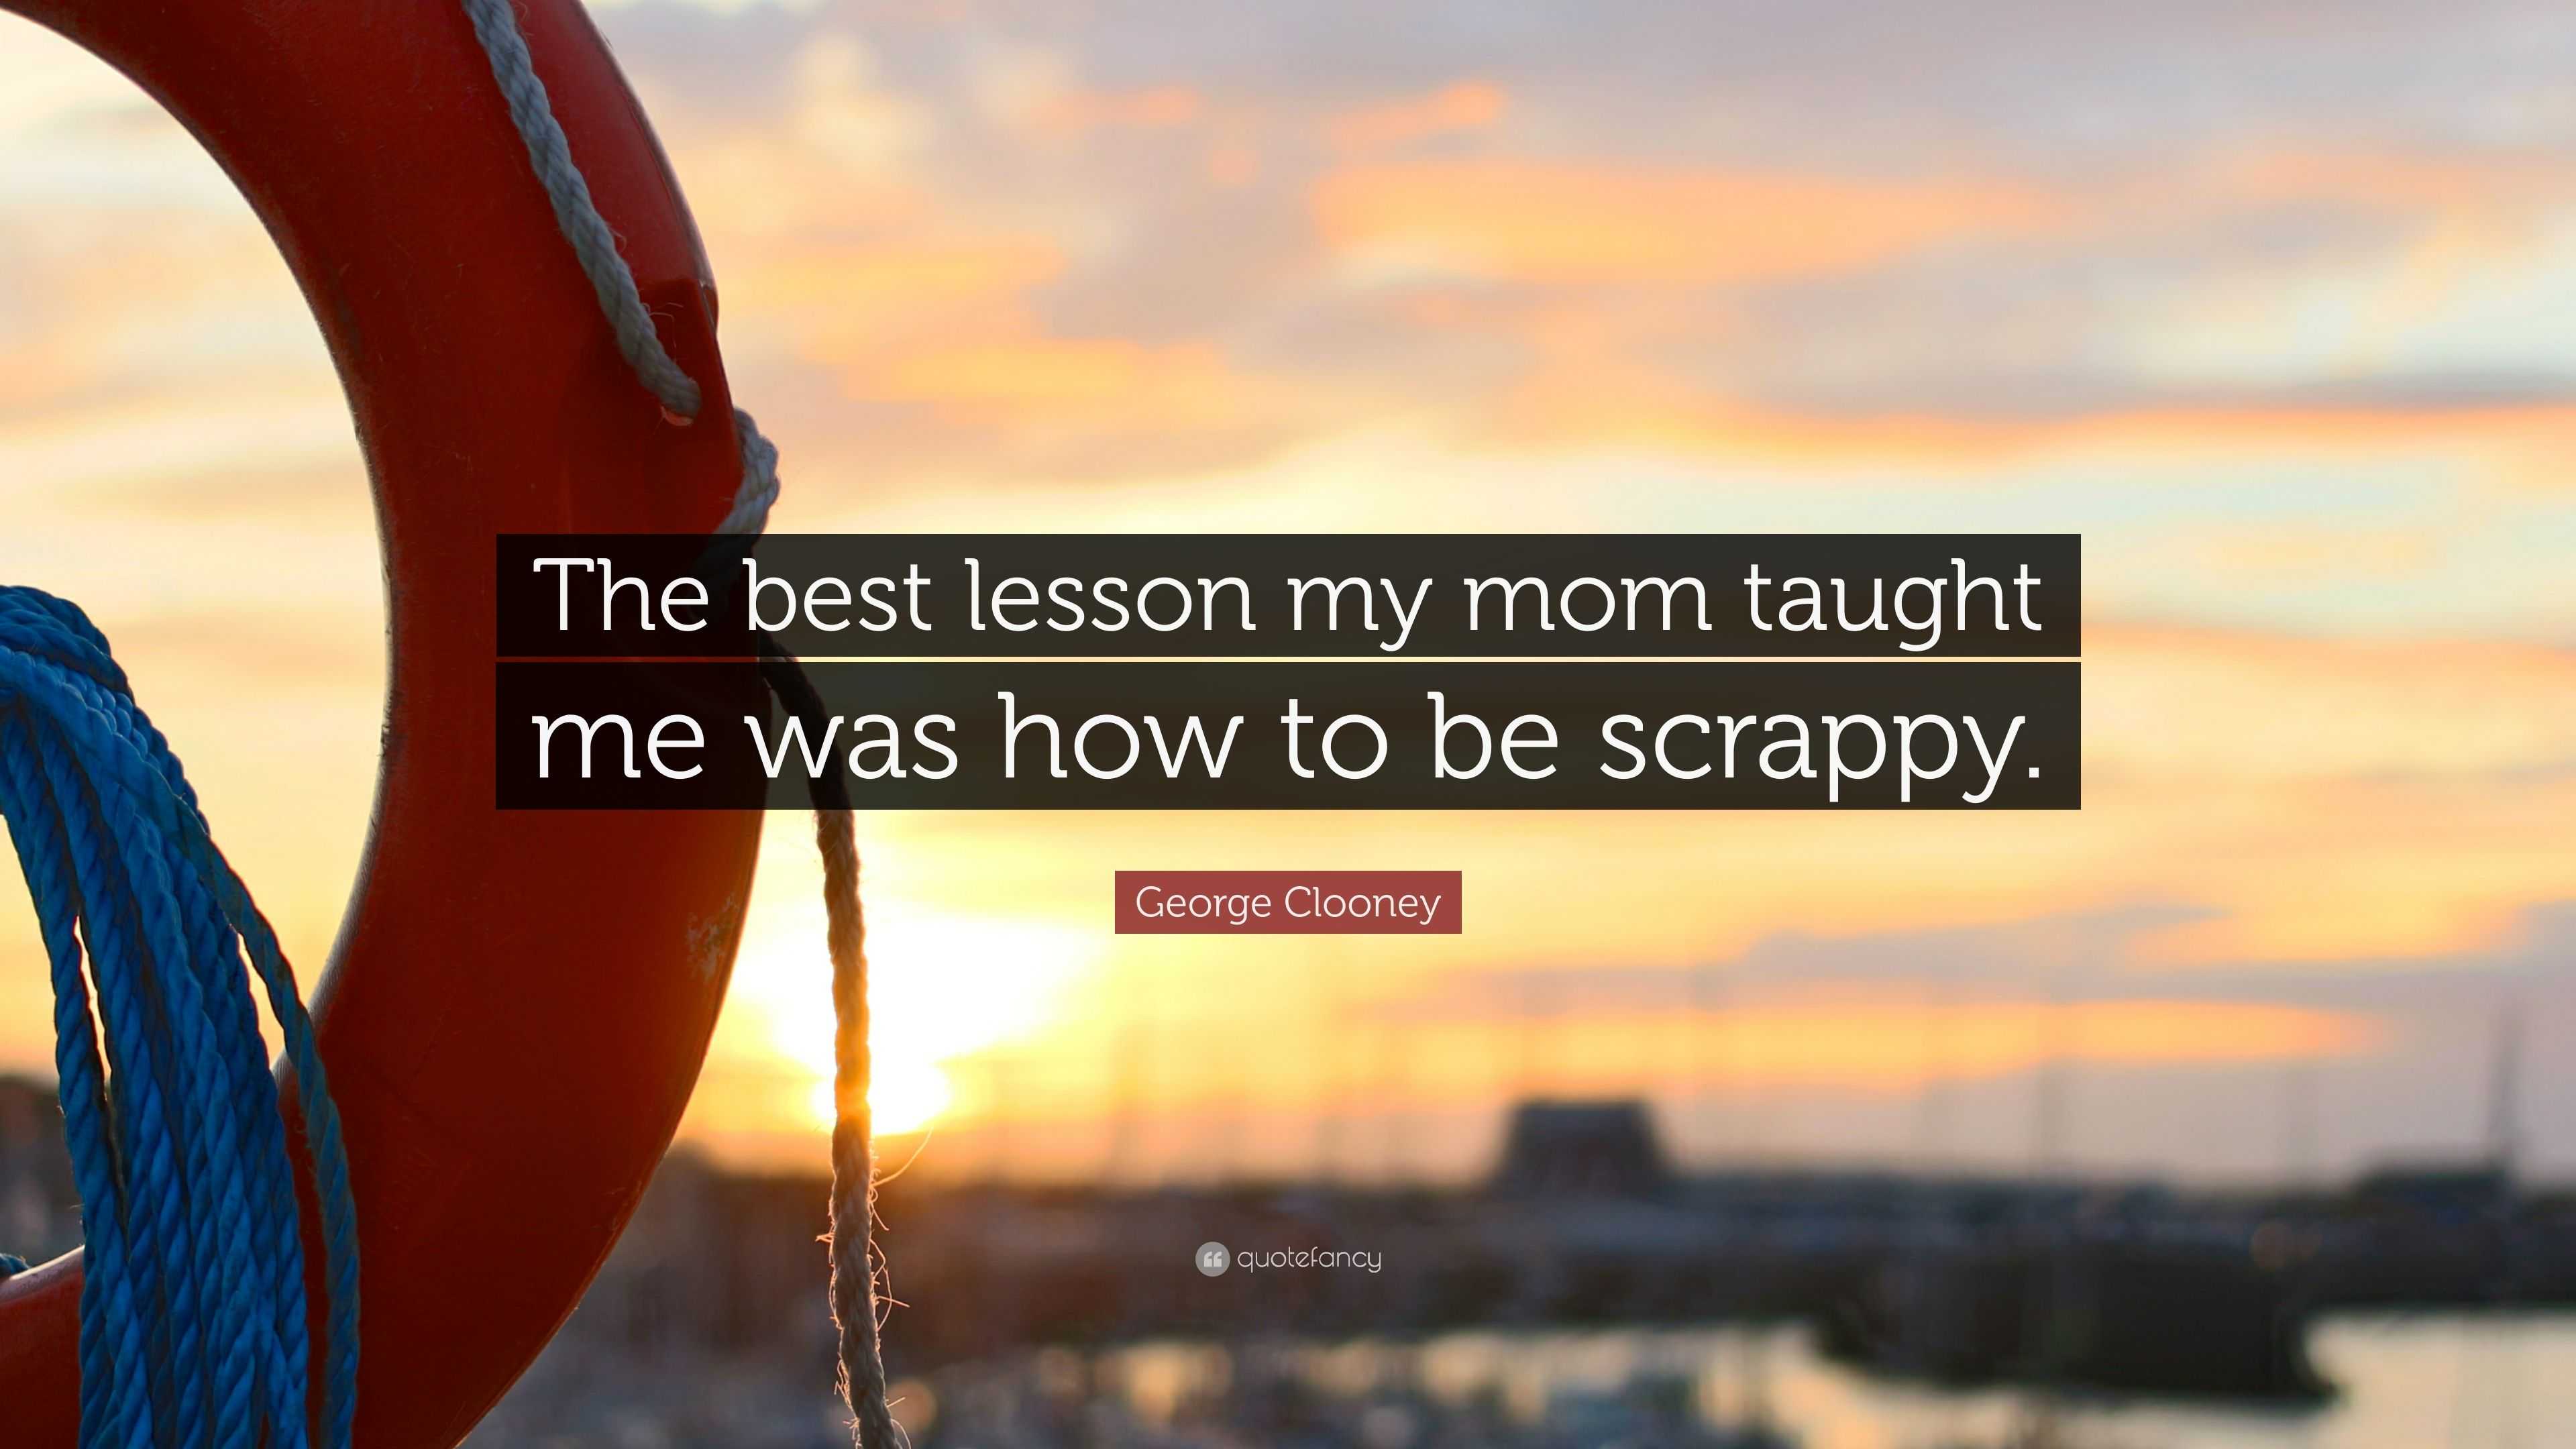 Spend Like My Mom Taught Me to Curse: Only When You Mean It - Good Life.  Better.